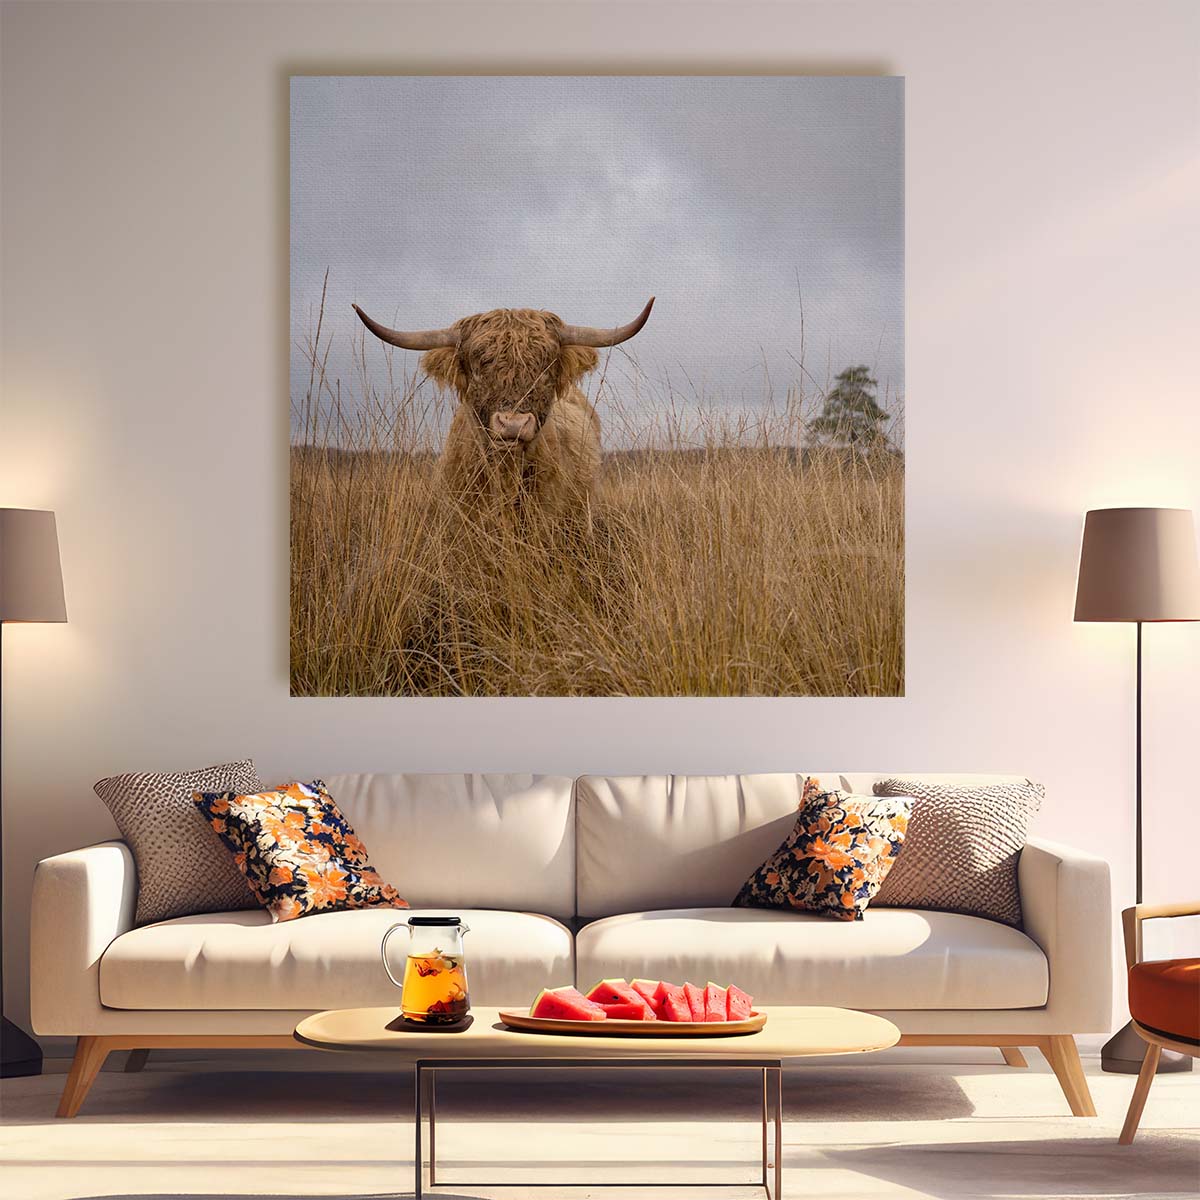 Rustic Farmhouse Highland Cow Landscape Photography Wall Art by Luxuriance Designs. Made in USA.